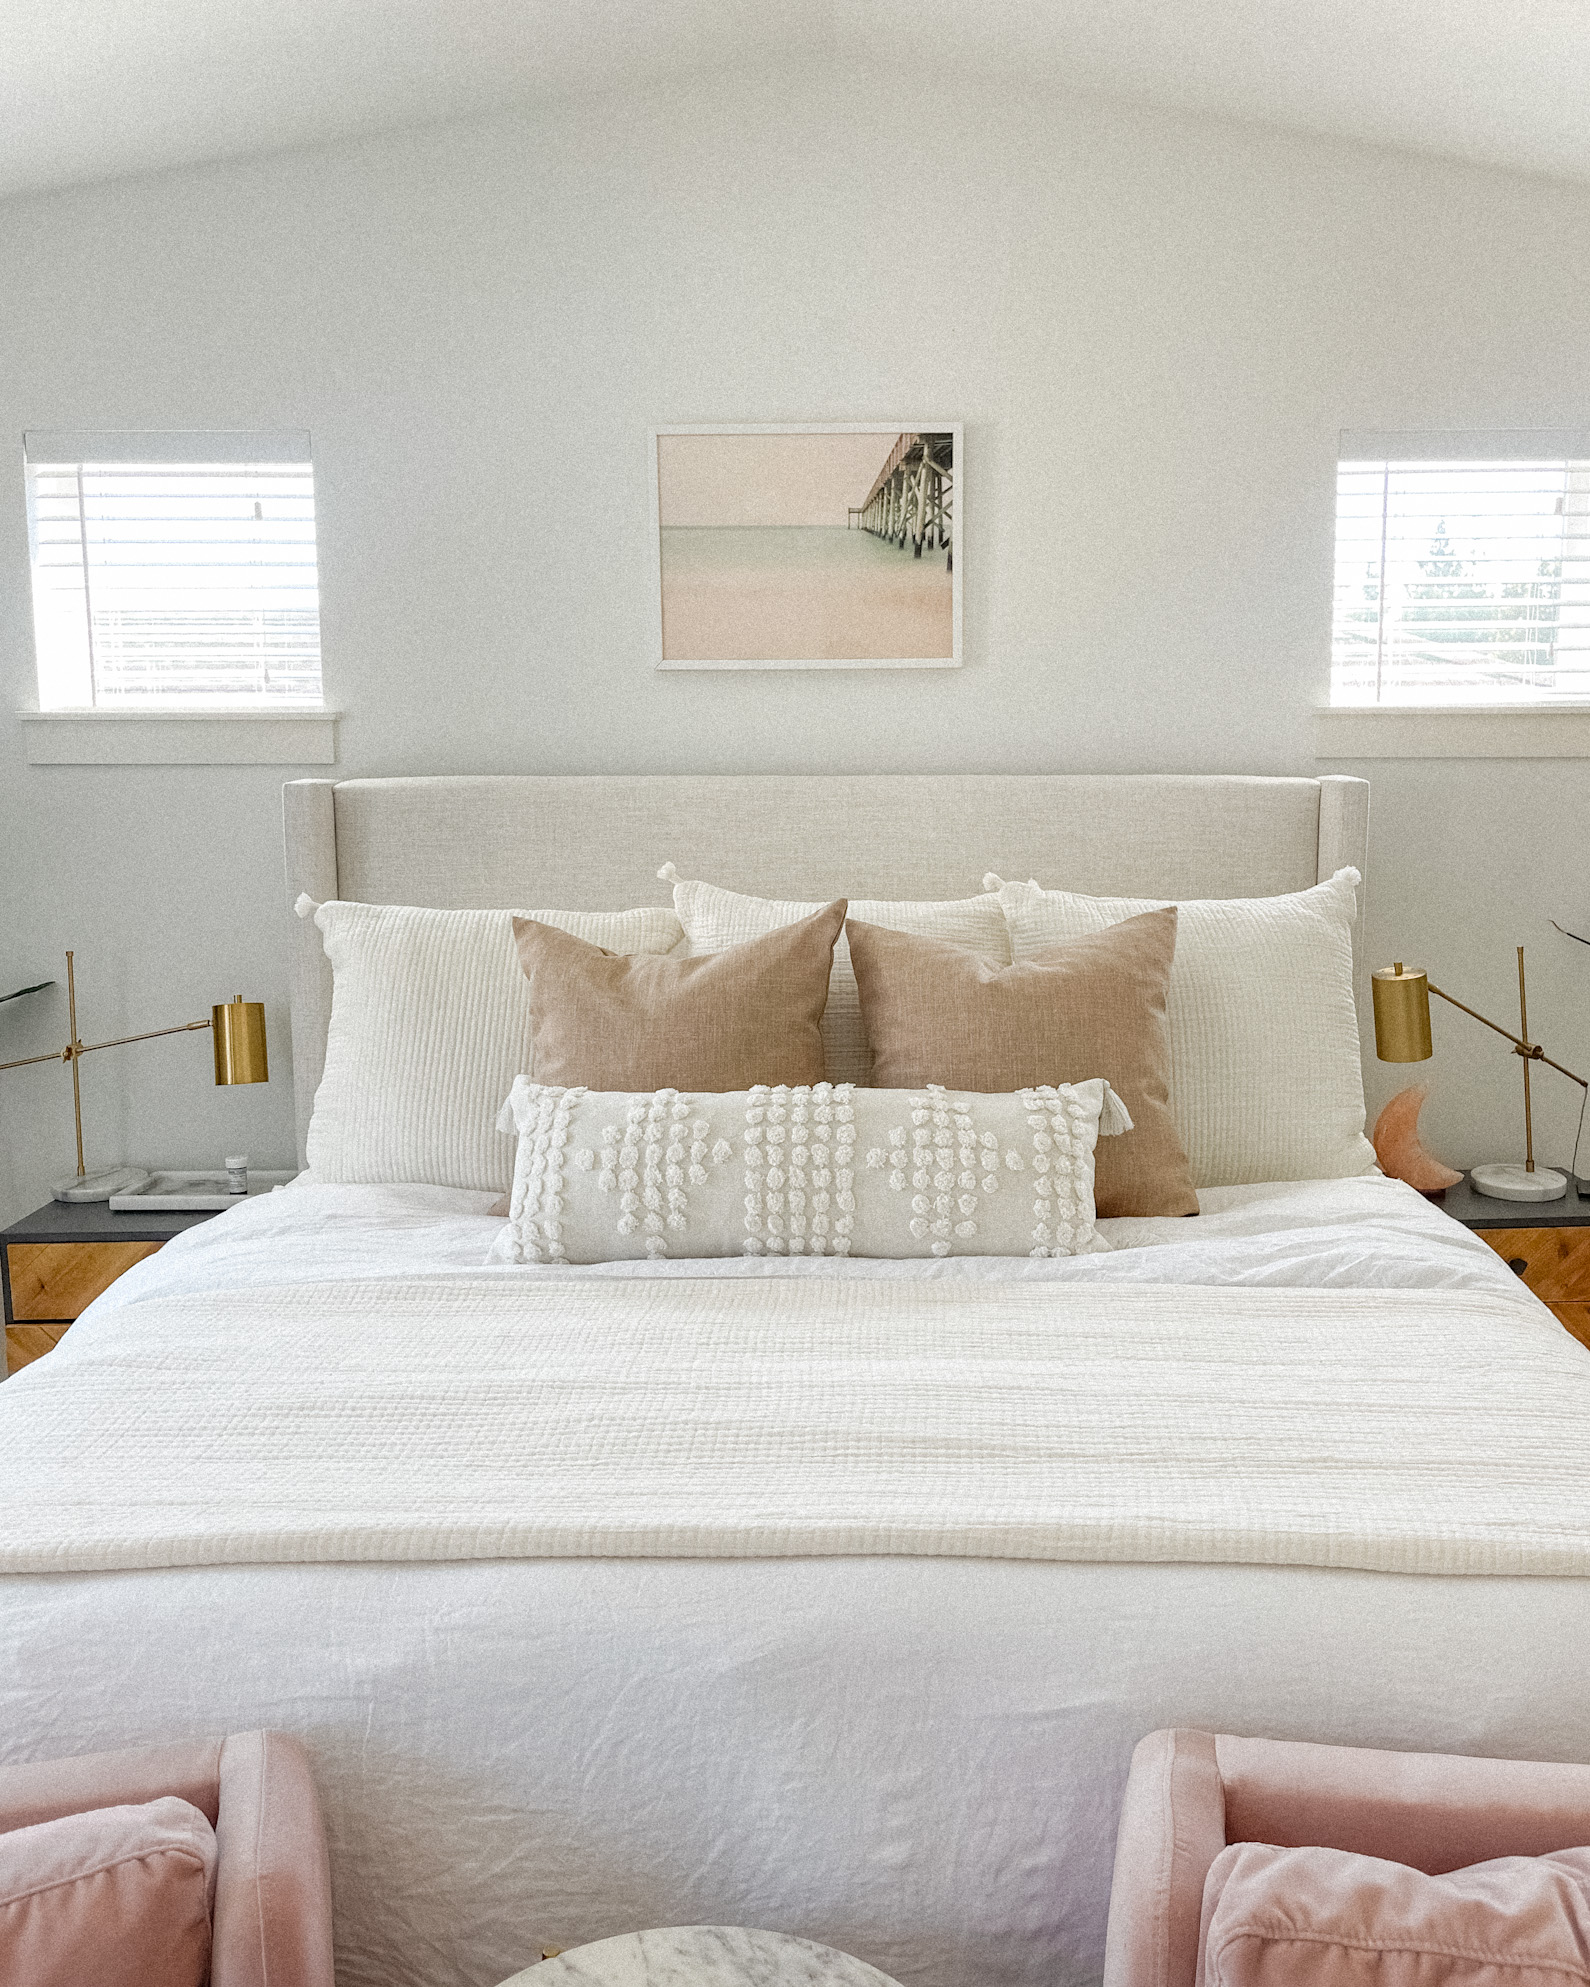 How To Arrange Pillows On A King Bed, Long Pillows For King Size Bed